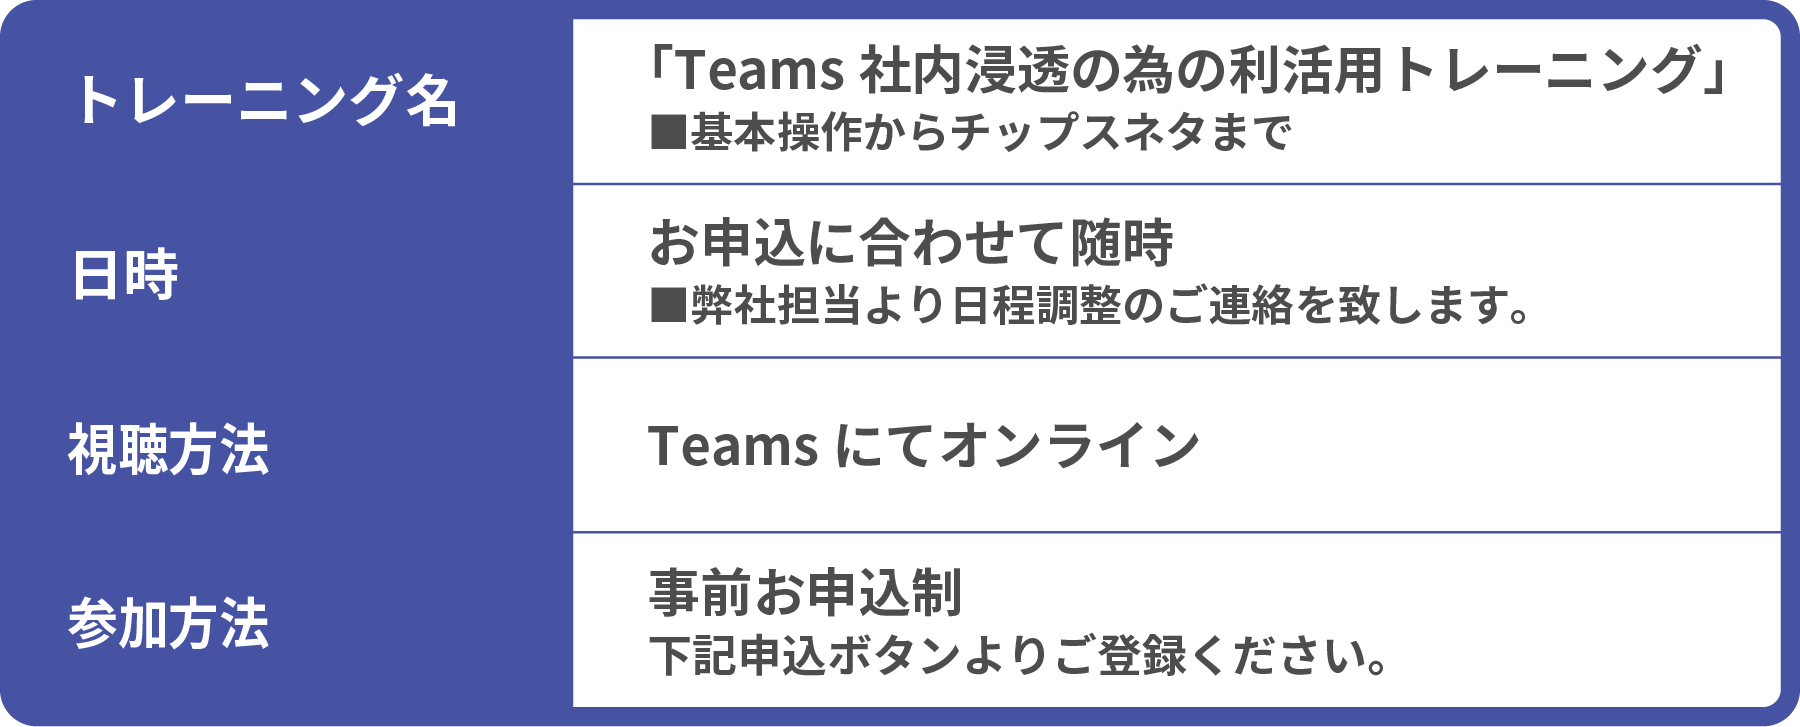 appsws_teams_about.png